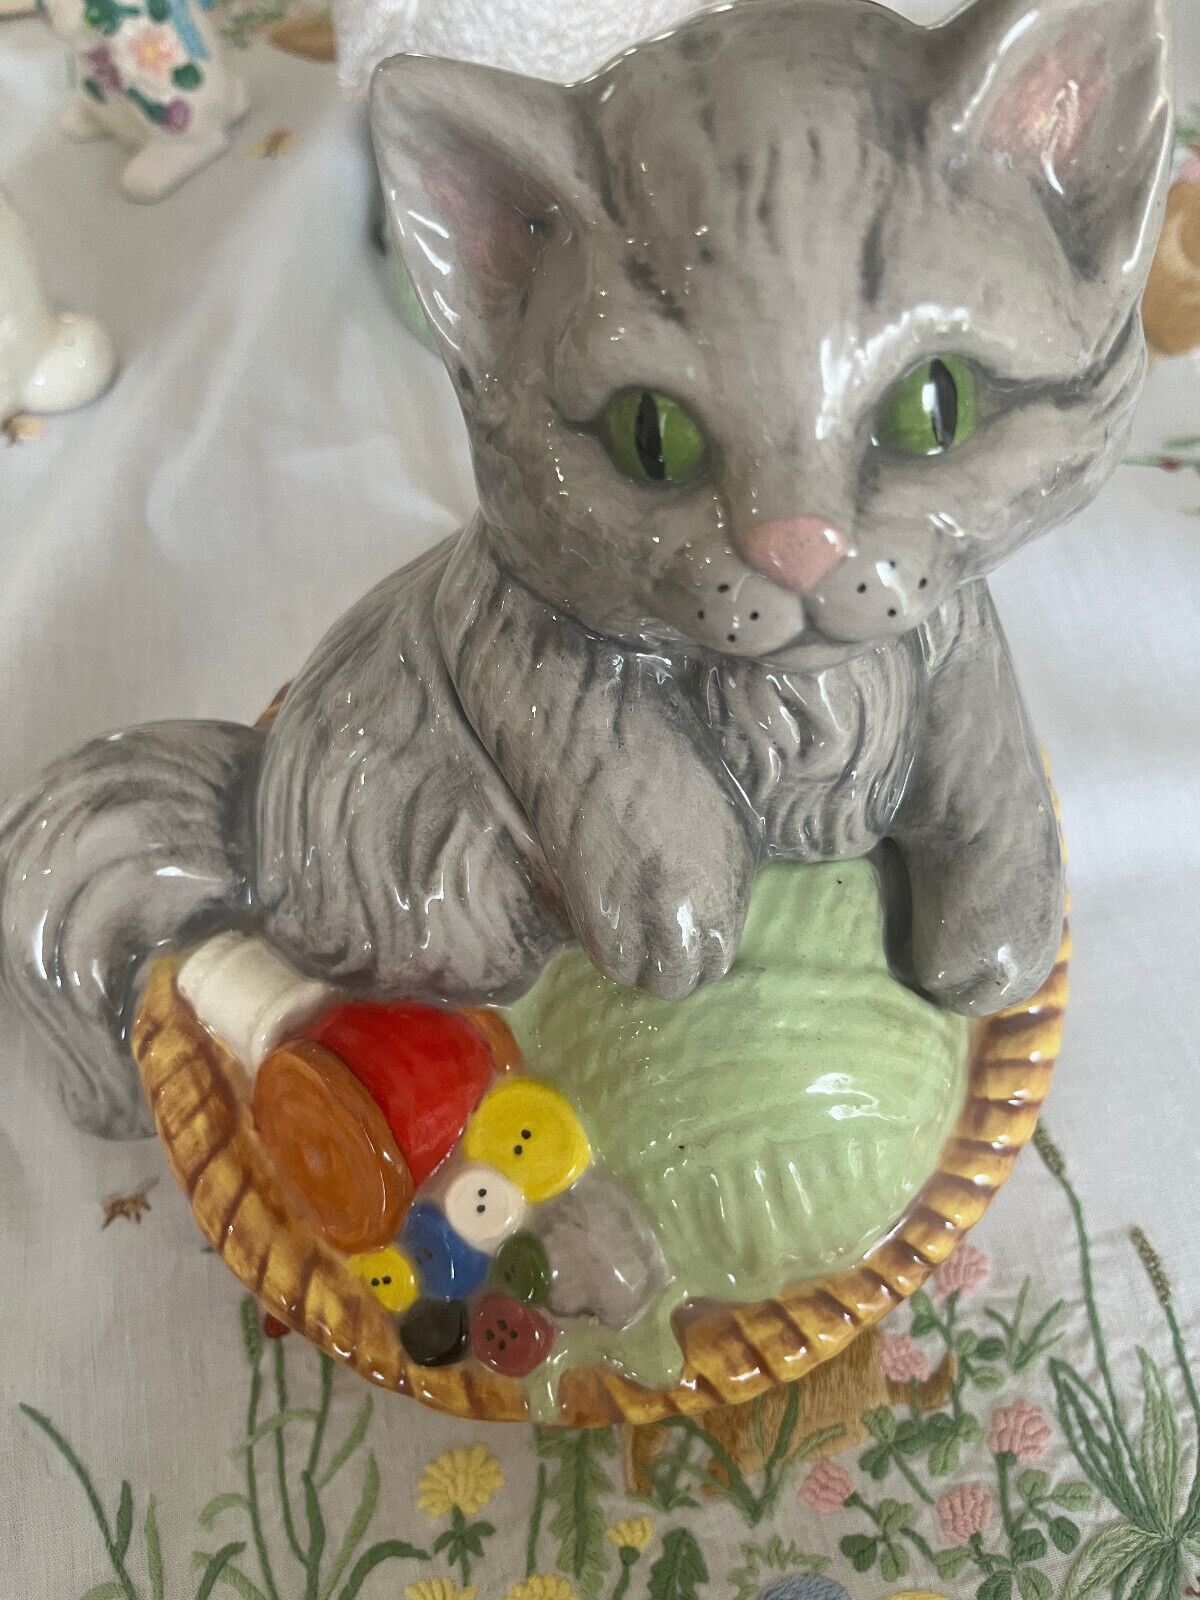 Vintage Ceramic Grey Sitting Cat in Basket figurine w/Buttons and Wool